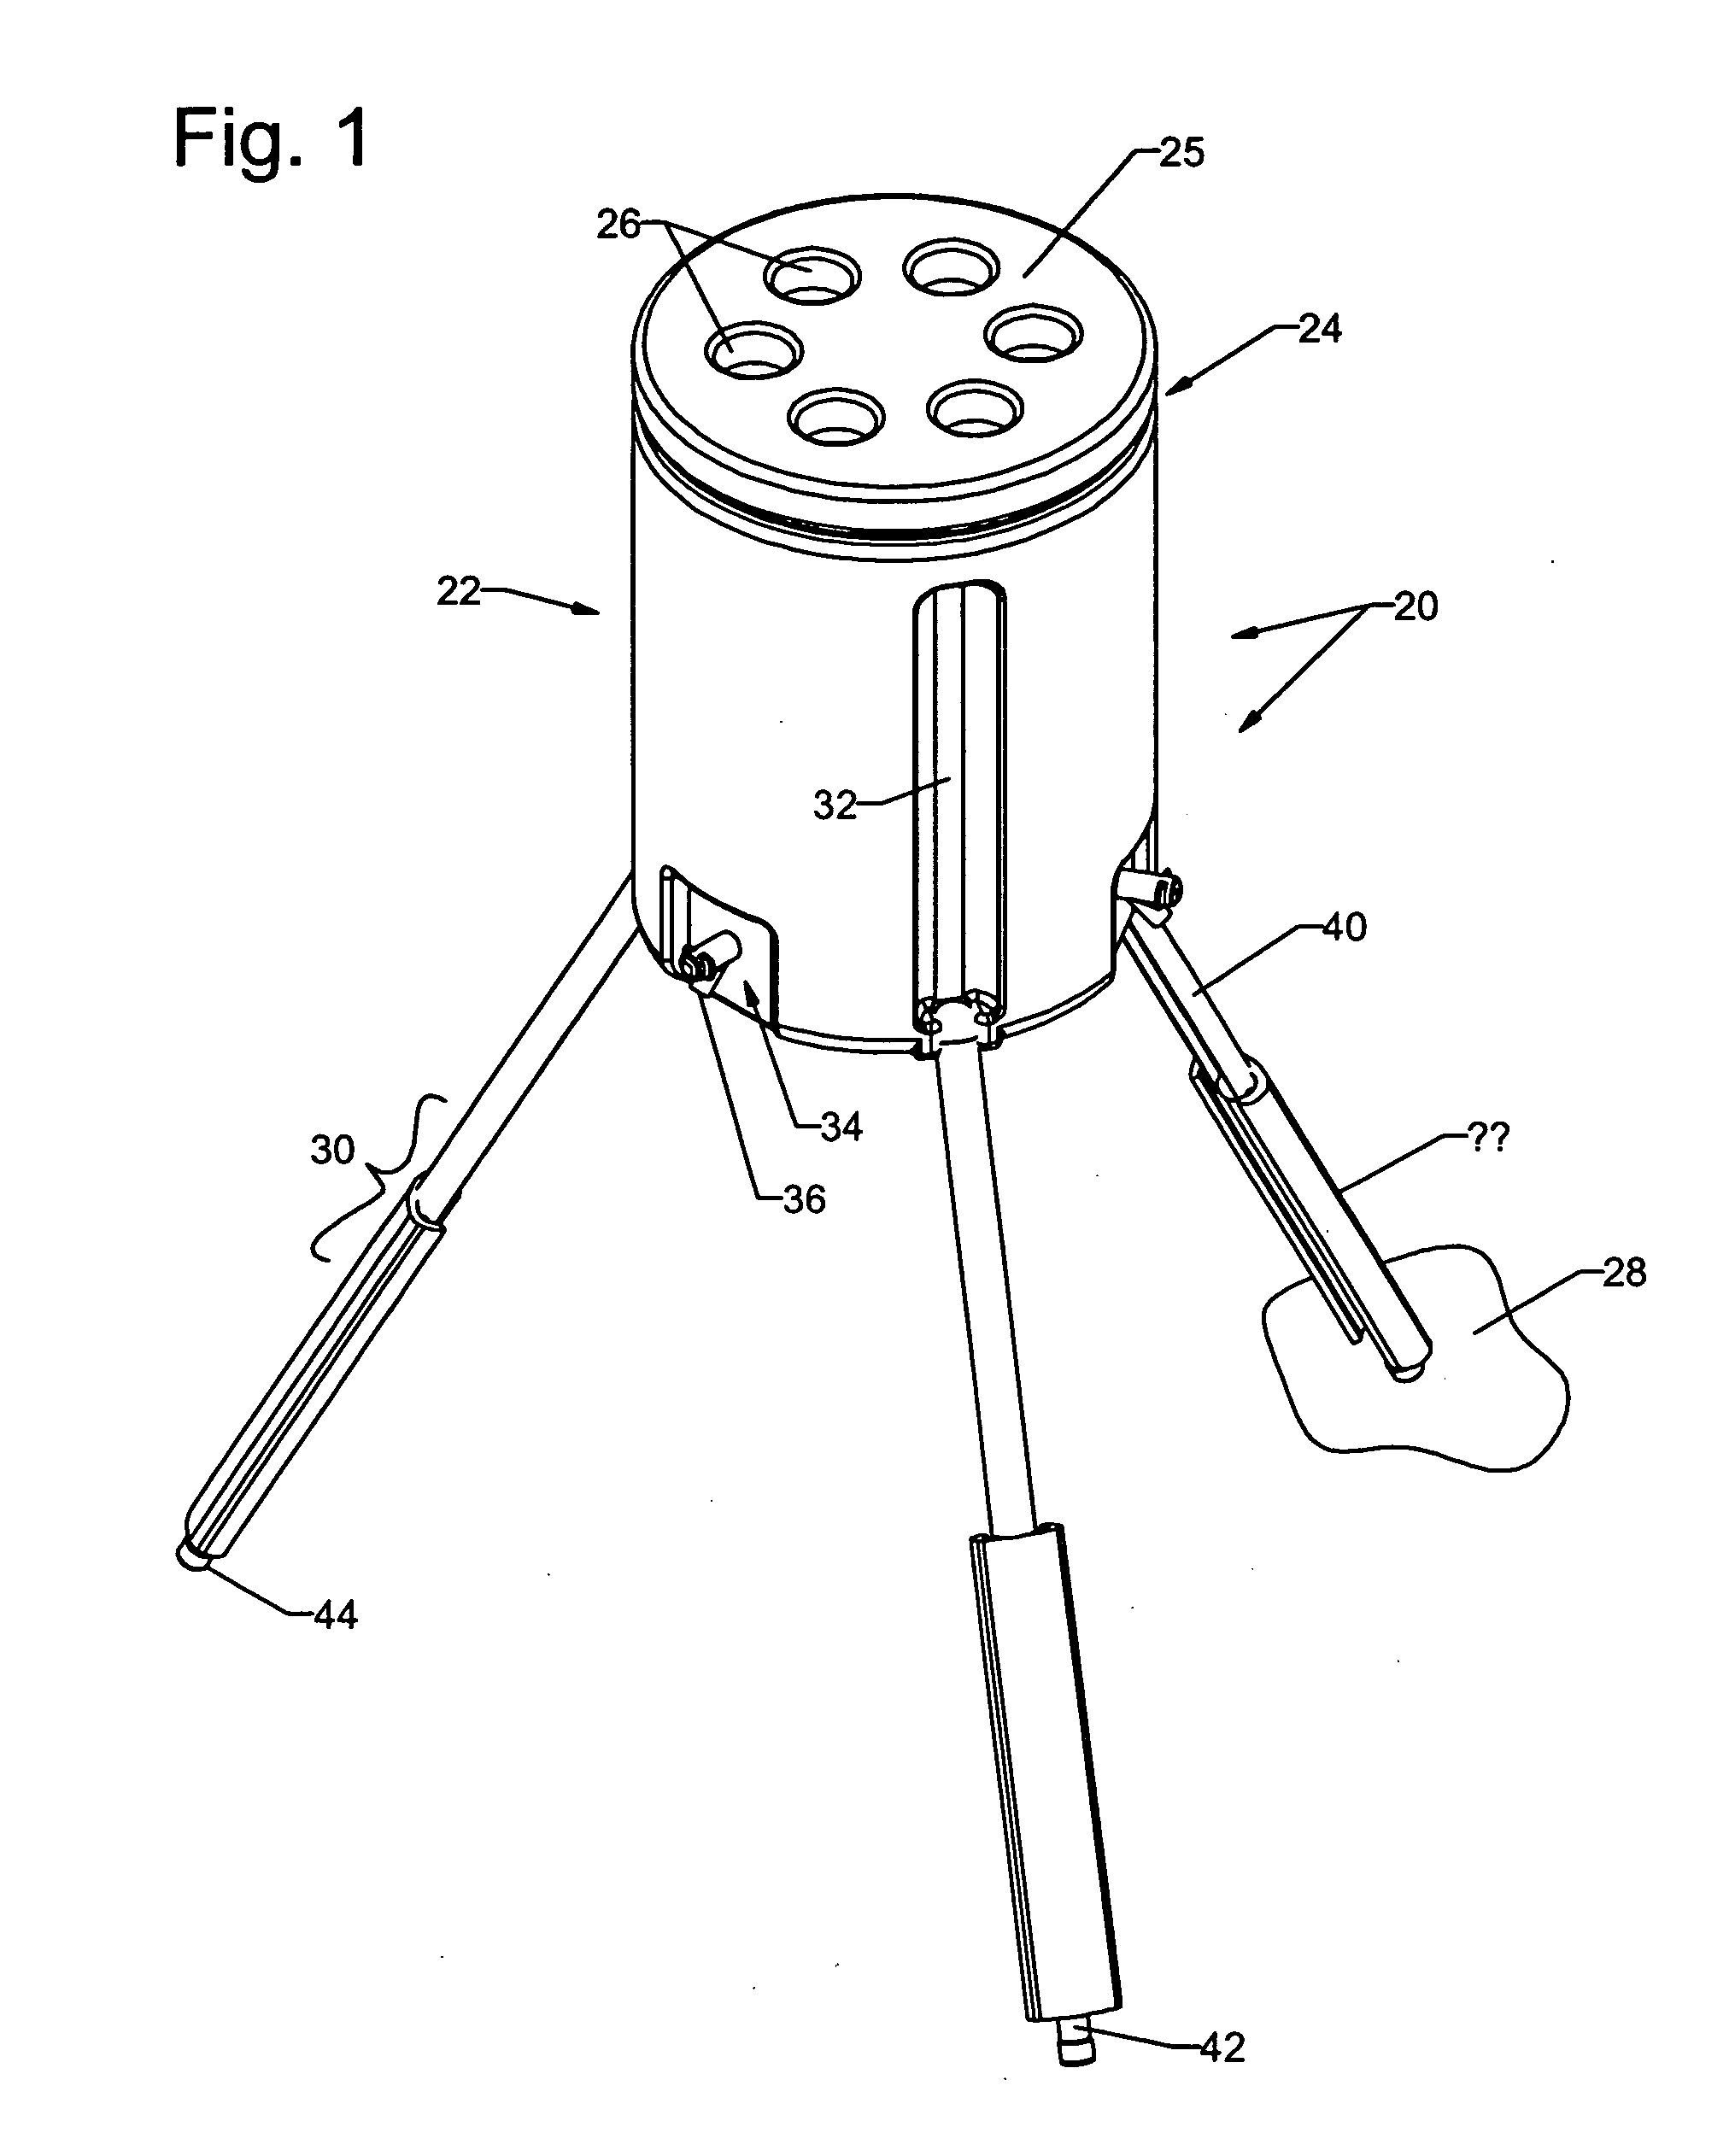 Multi-user transformable water cooler